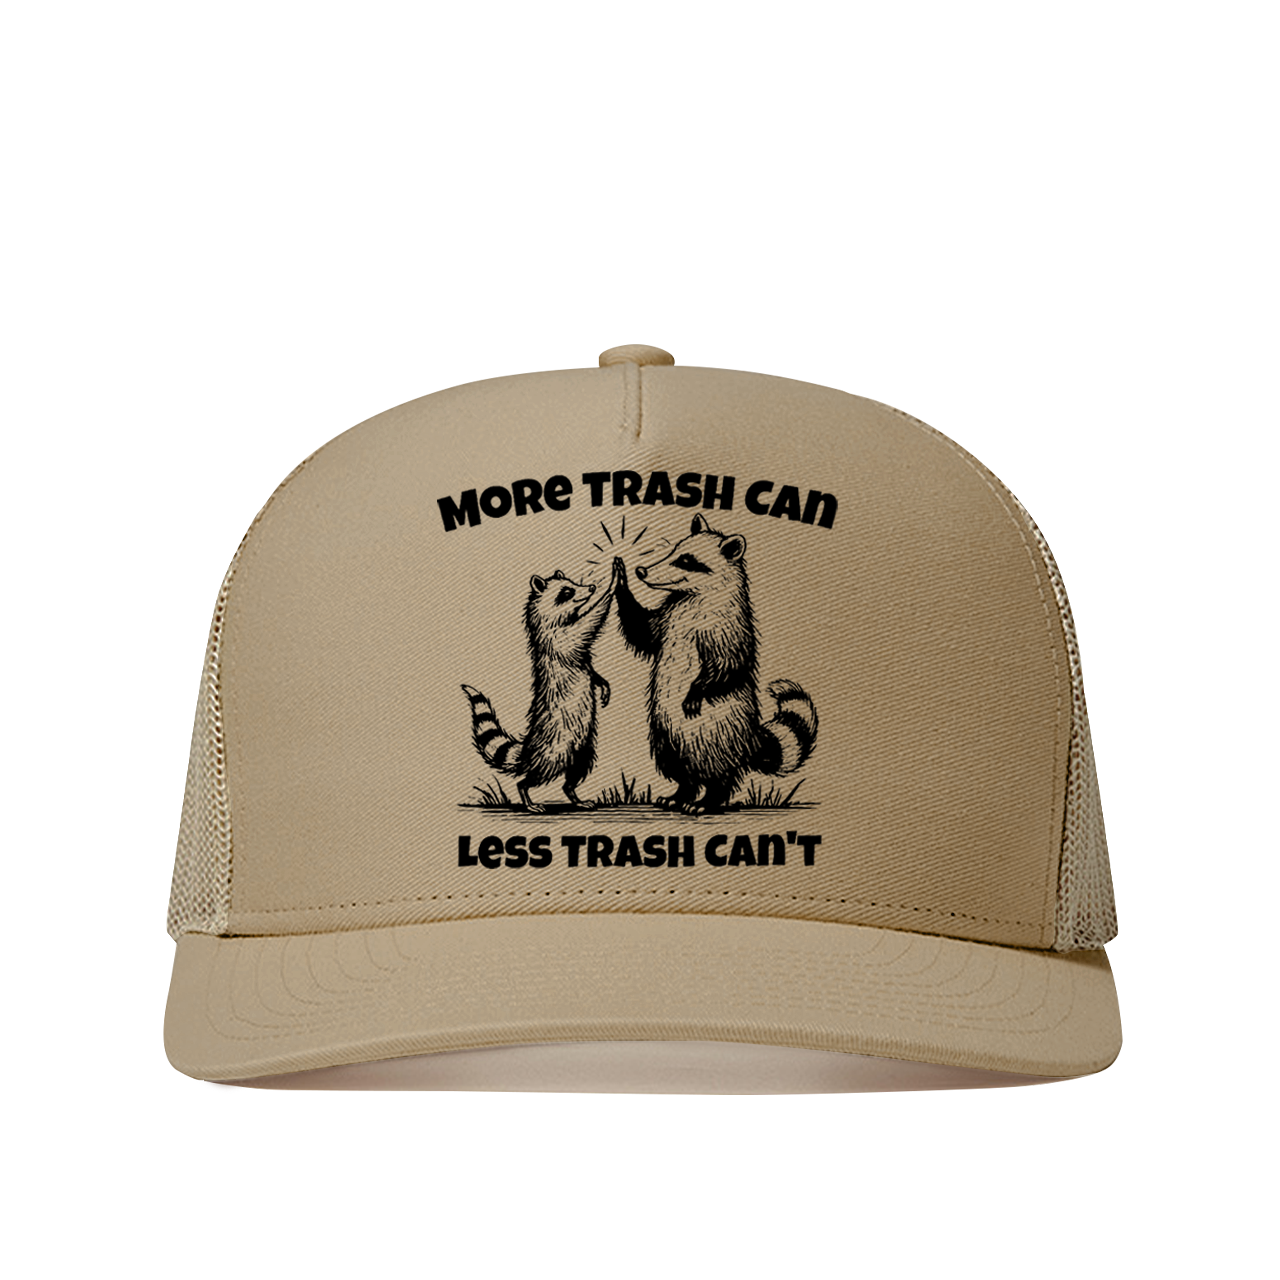 More Trash Can Less Trash Can't Trucker Hat 